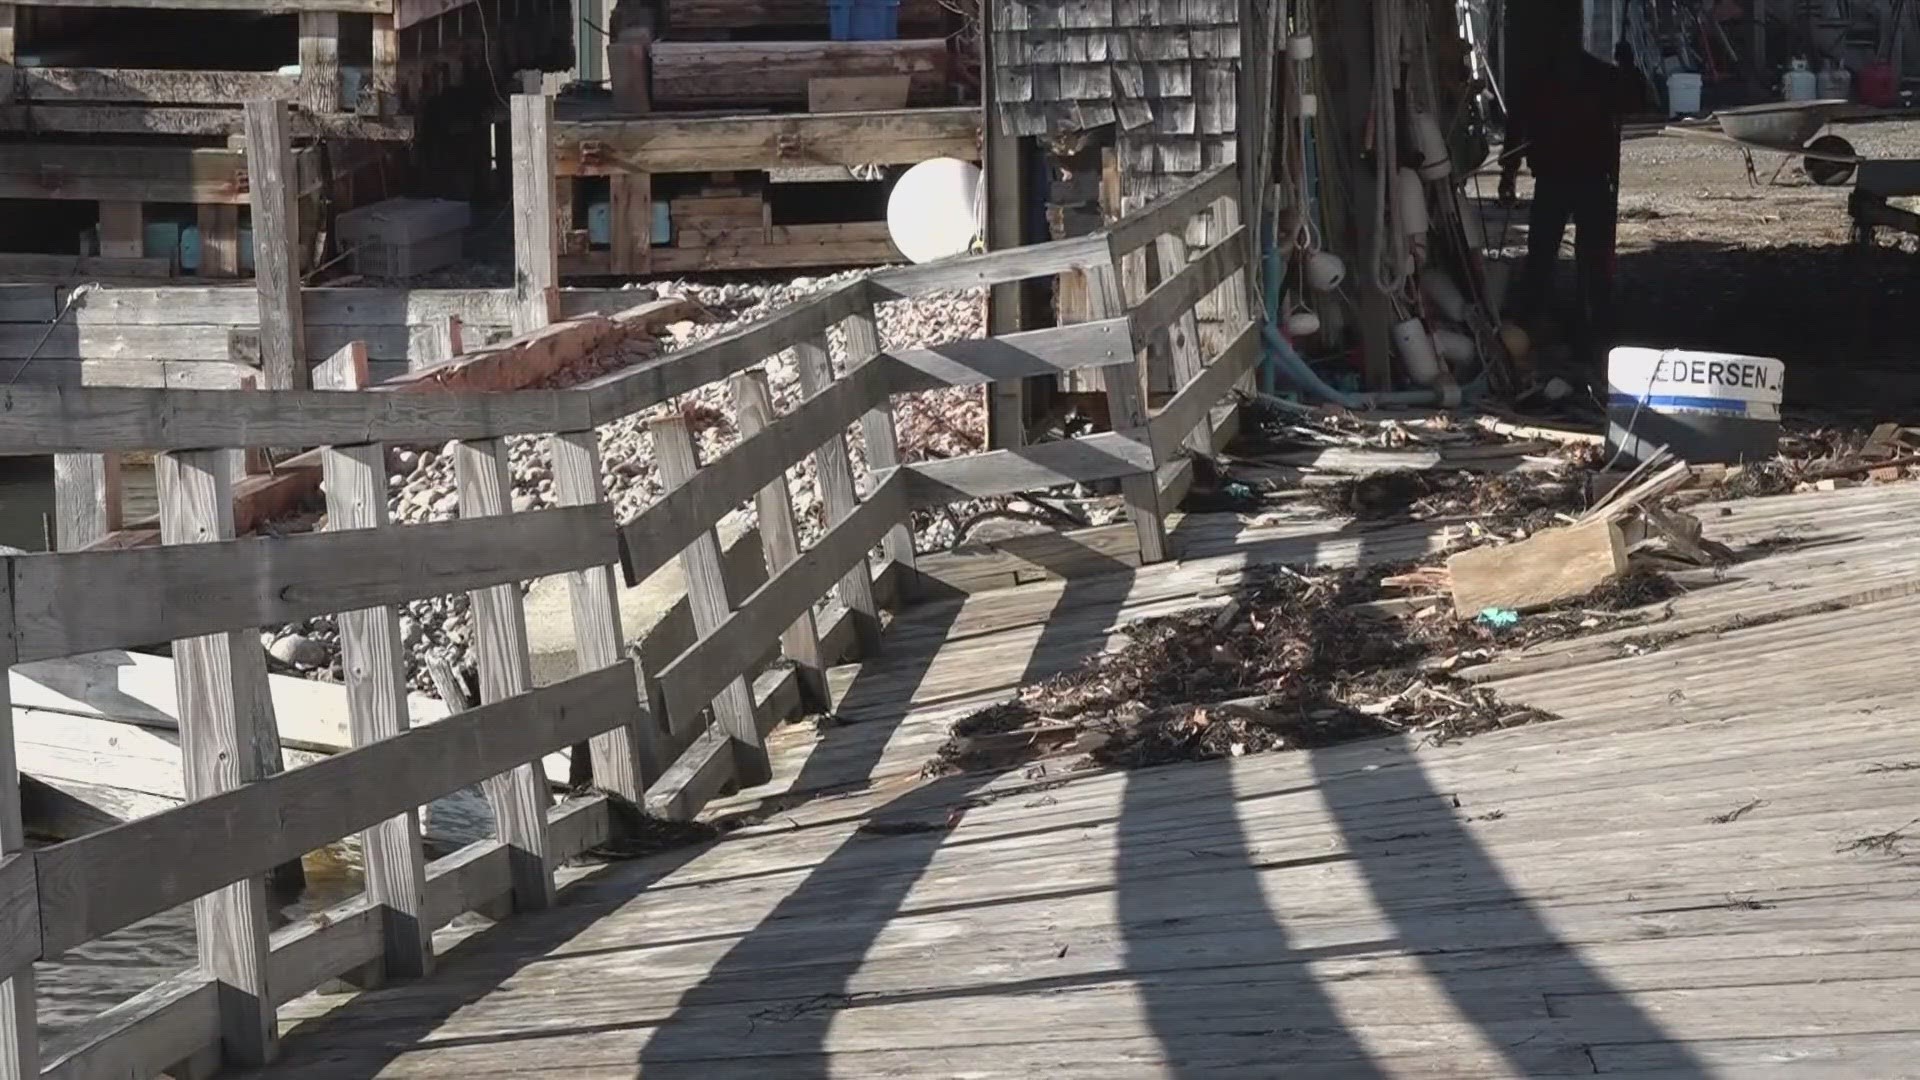 The town's pier, as well as a historic boatyard, saw significant damage during Saturday's storm.